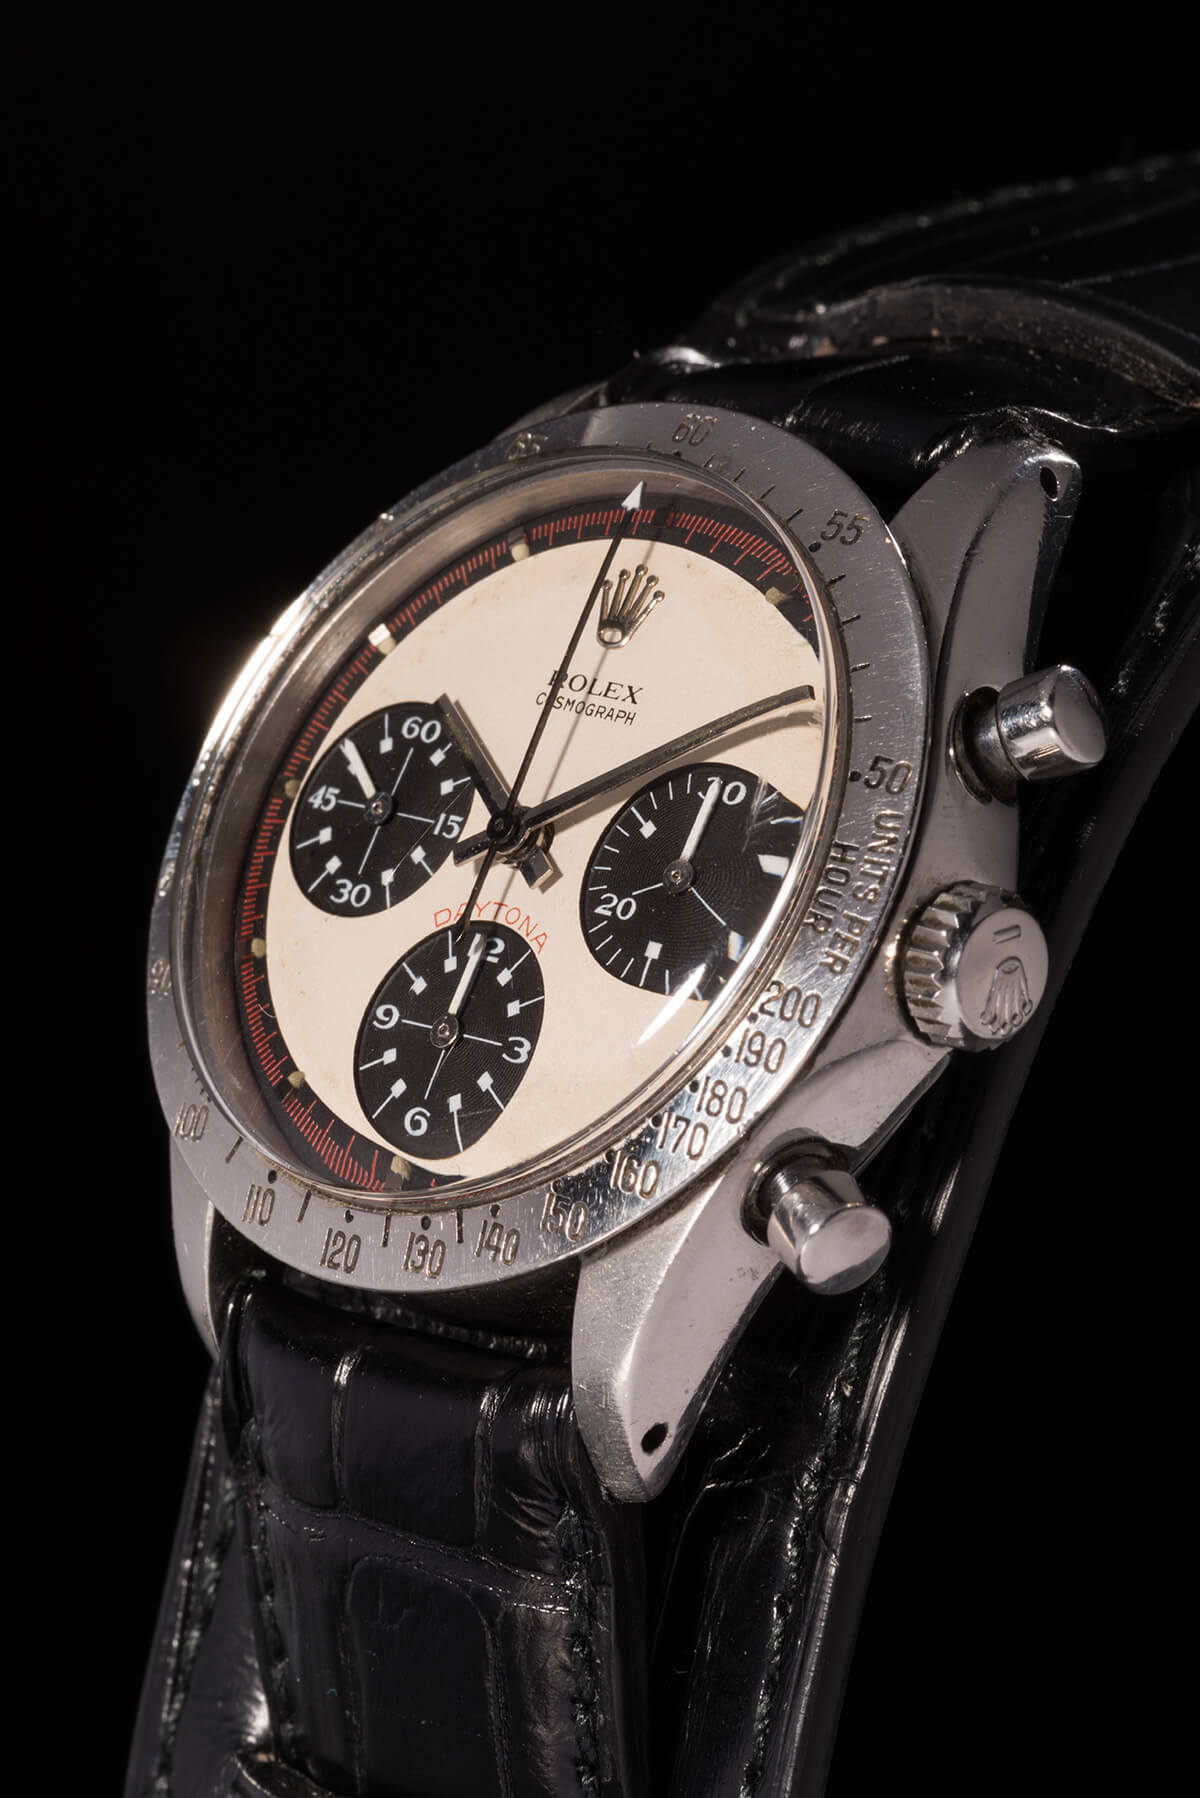 Parting shot: Paul Newman’s personal Rolex Daytona “Paul Newman” (photo courtesy Phillips/Bacs and Russo)